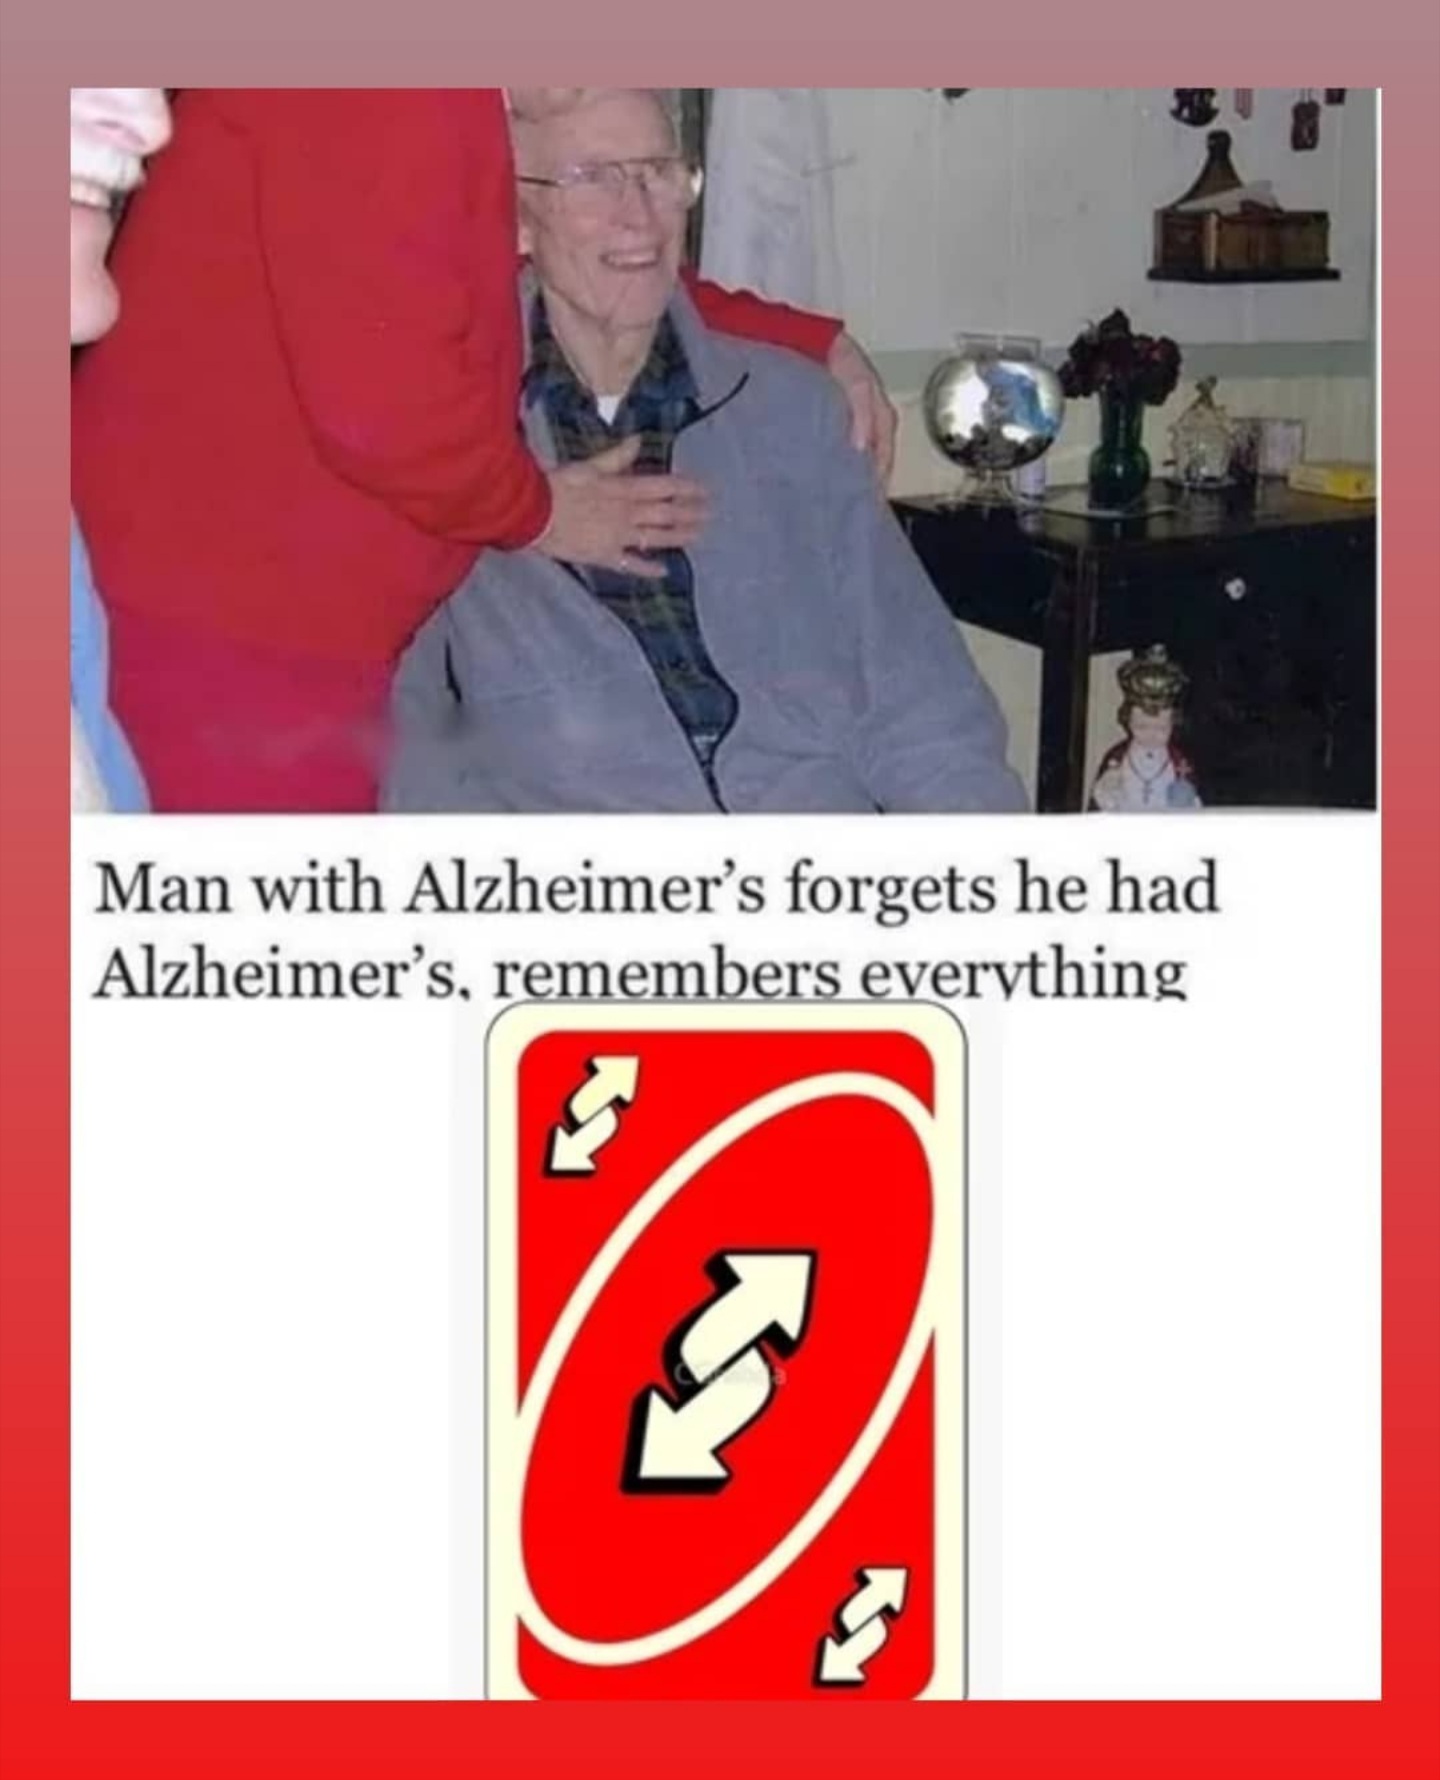 man with alzheimer's forgets he has alzheimer's - Man with Alzheimer's forgets he had Alzheimer's, remembers everything